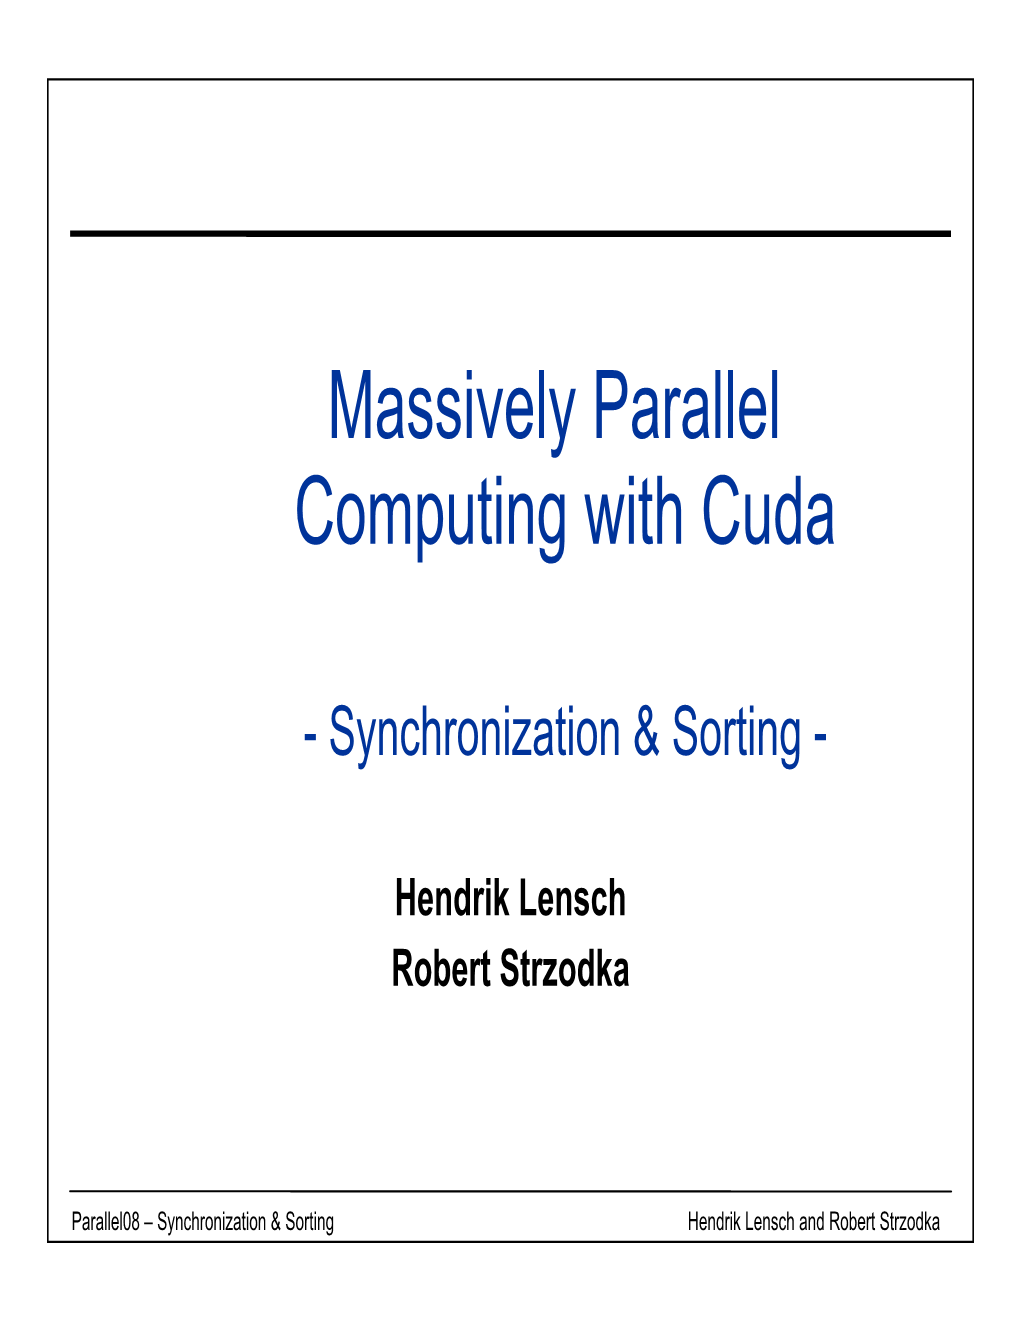 Massively Parallel Computing with Cuda